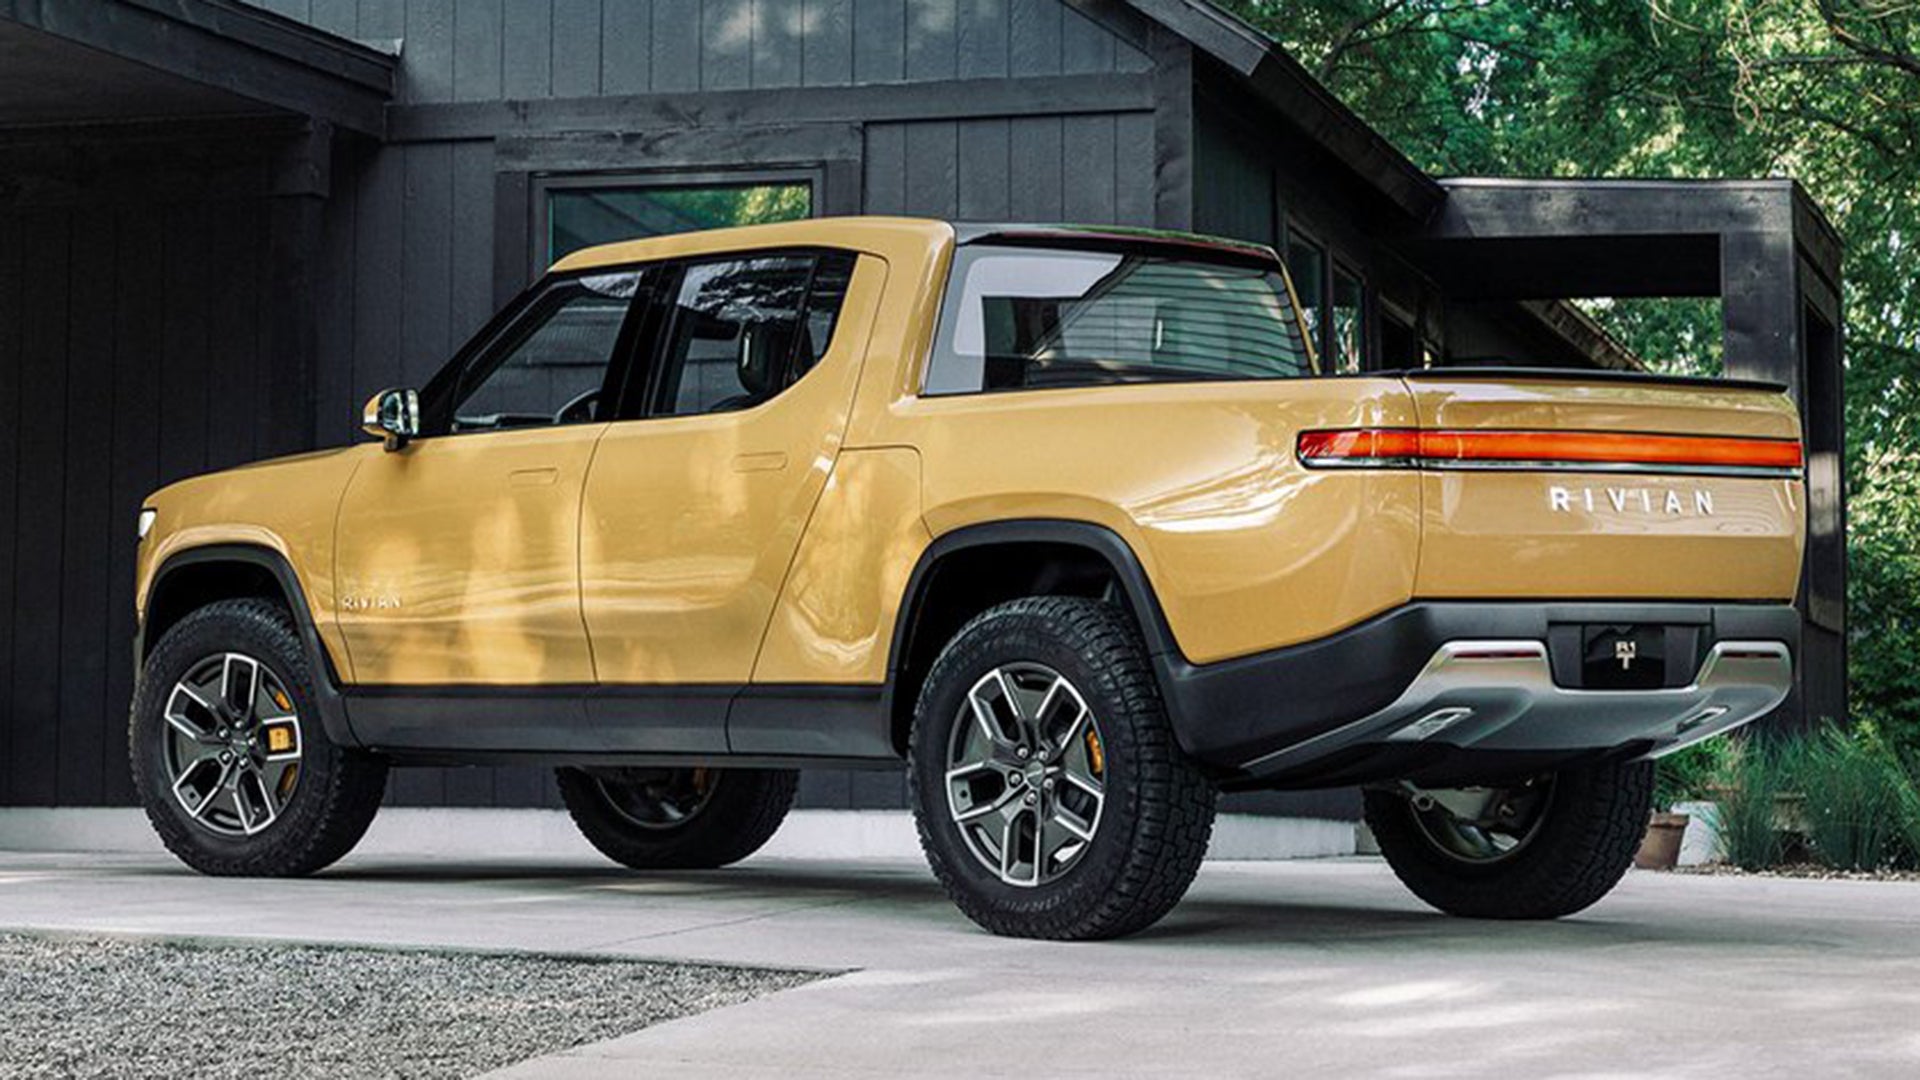 Electric Truck Maker Rivian Raises Another $2.5 Billion, Its Biggest Investment Yet